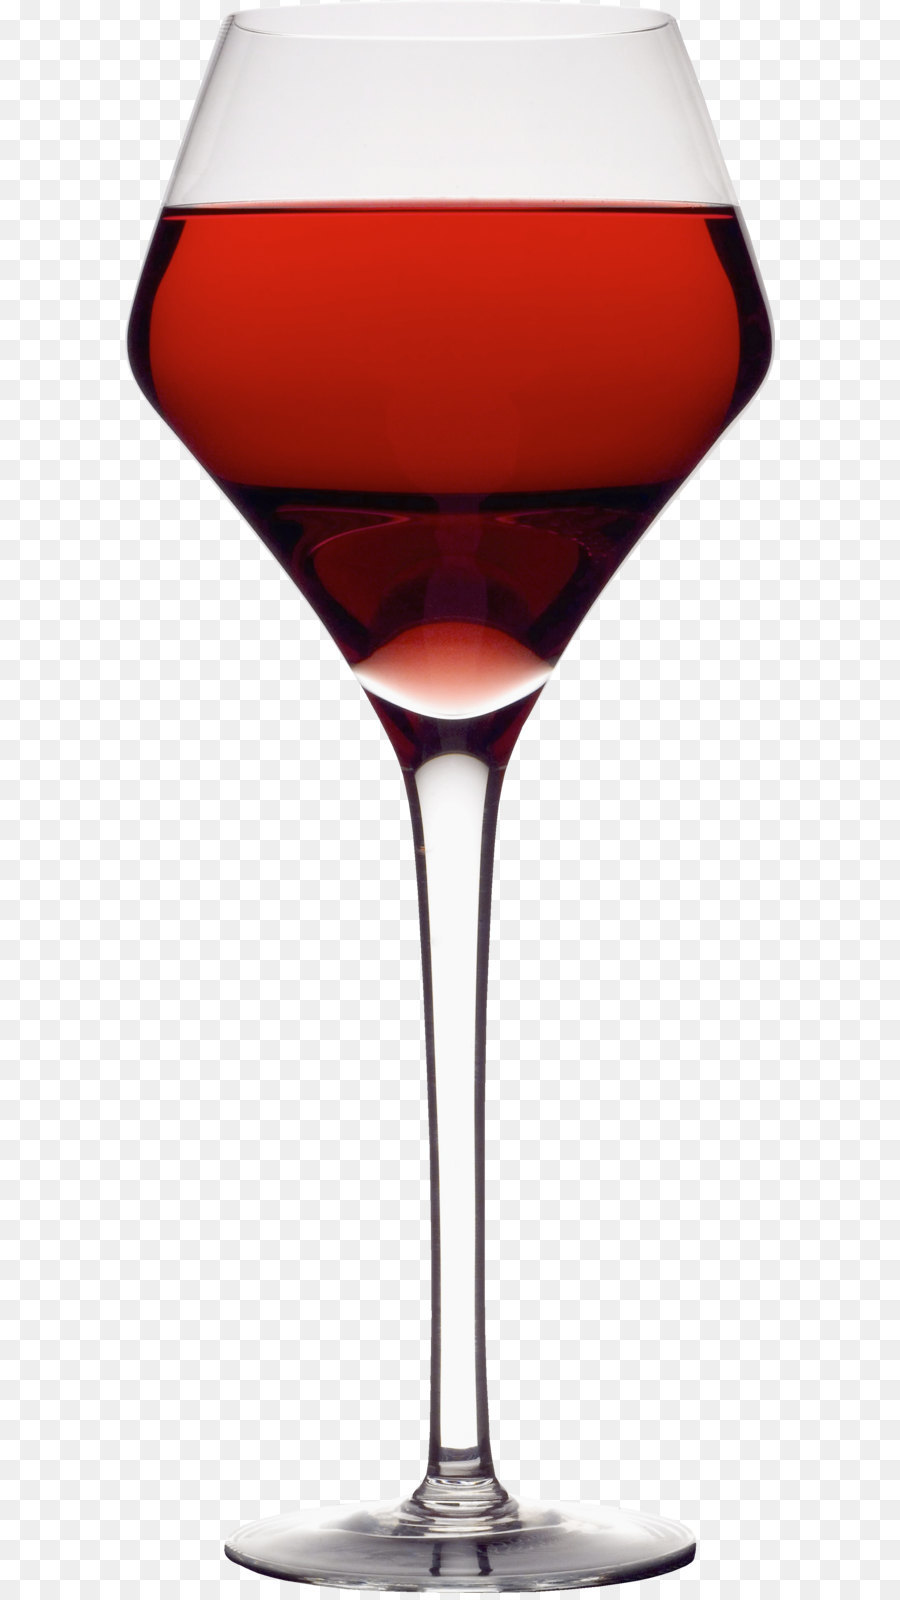 Red Wine Champagne Cognac Wine glass - Glass PNG image png download - 1971*4829 - Free Transparent Red Wine png Download.